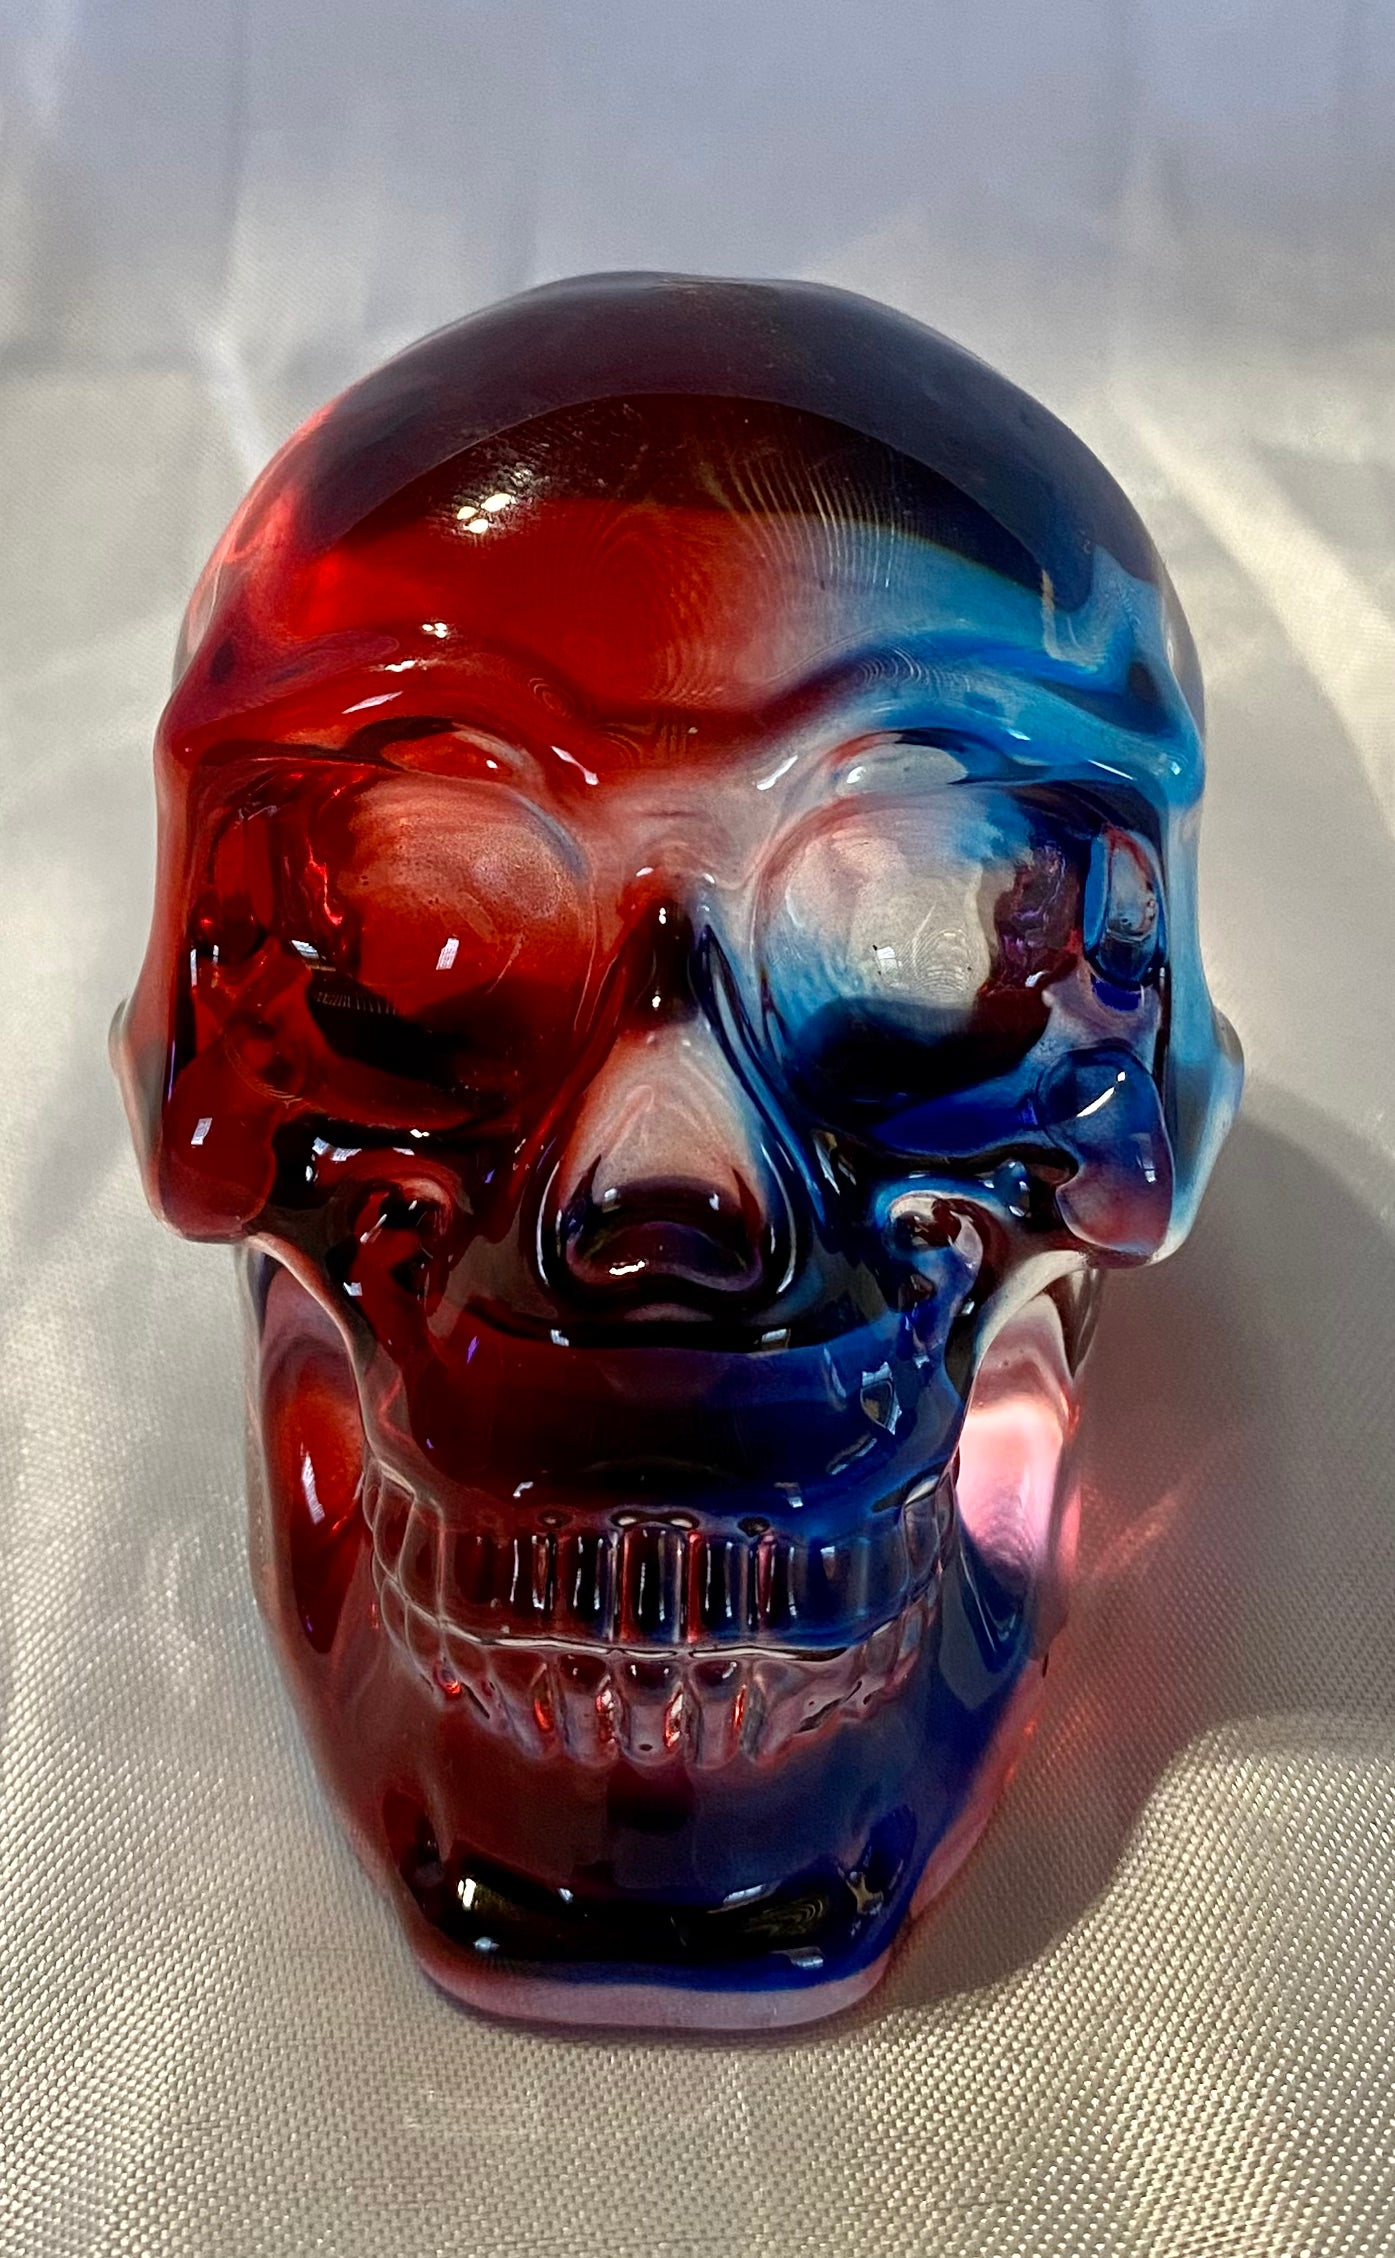 Large Colorful Glass Skull - Halloween decor, spooky polished sculpture